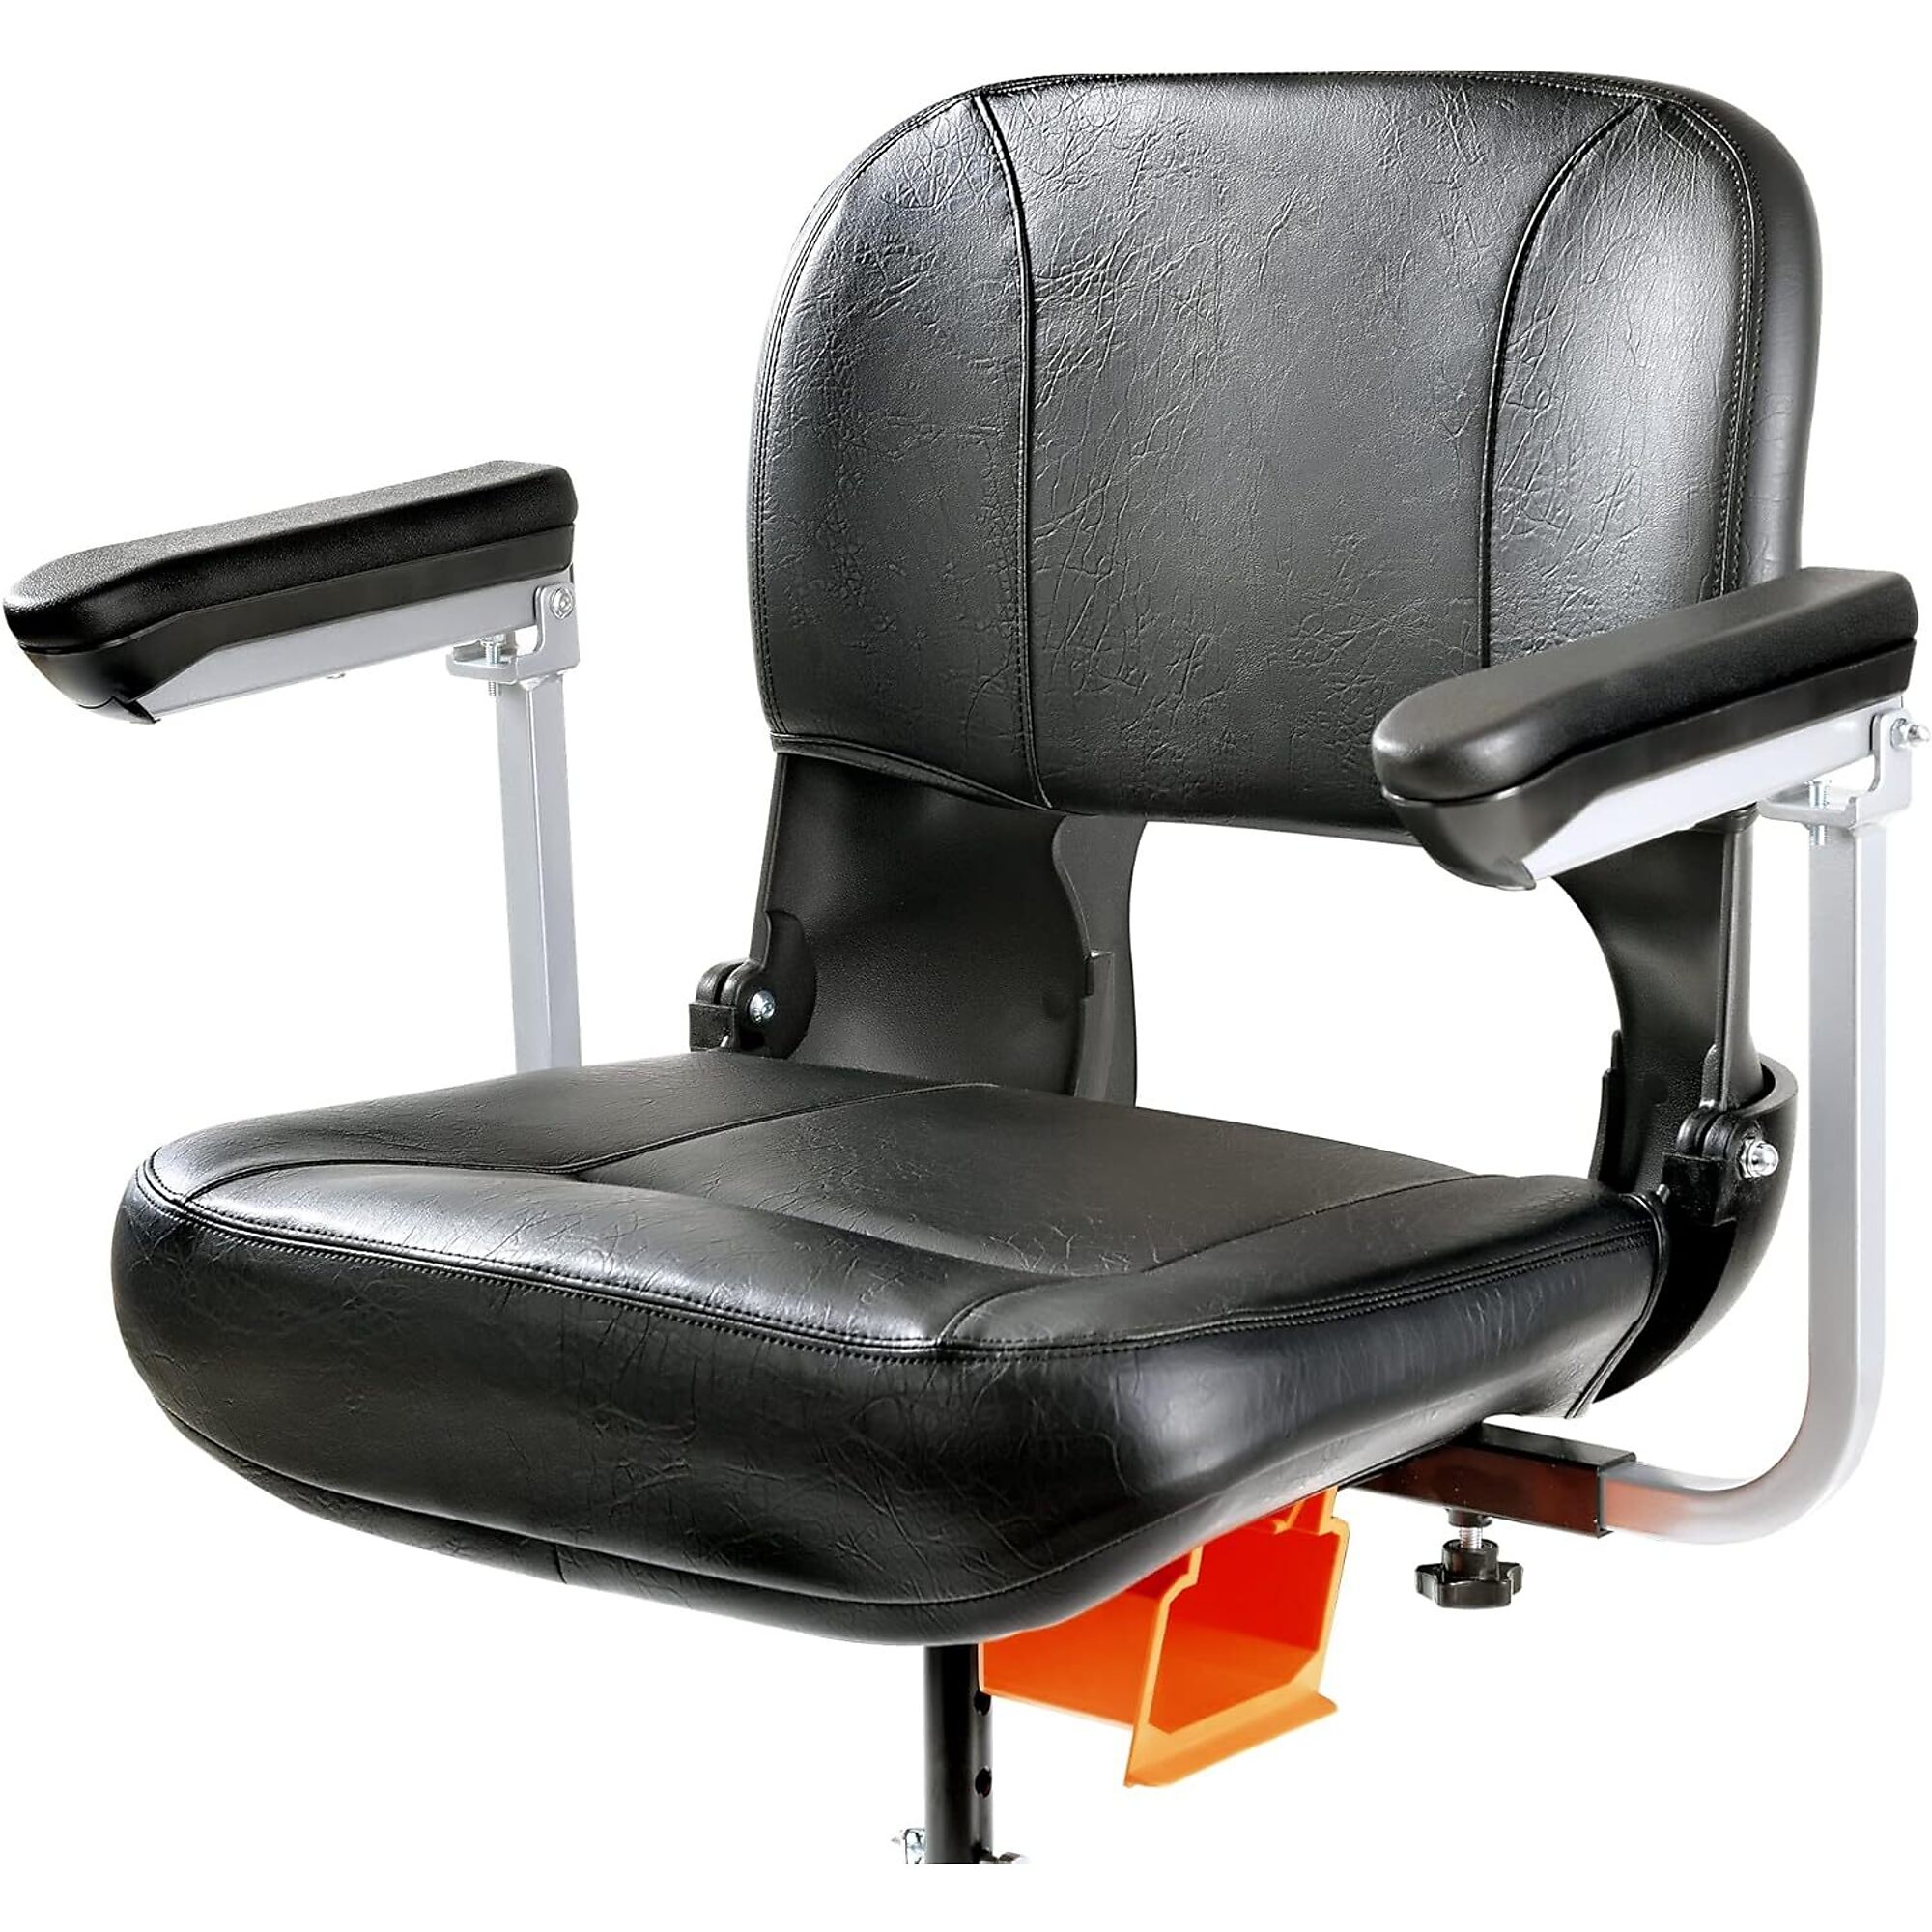 SuperHandy, Padded Faux Leather Cushioned Seat, Max. Speed 0 MPH, Weight Capacity 275 lb, Model TRI-GUT143